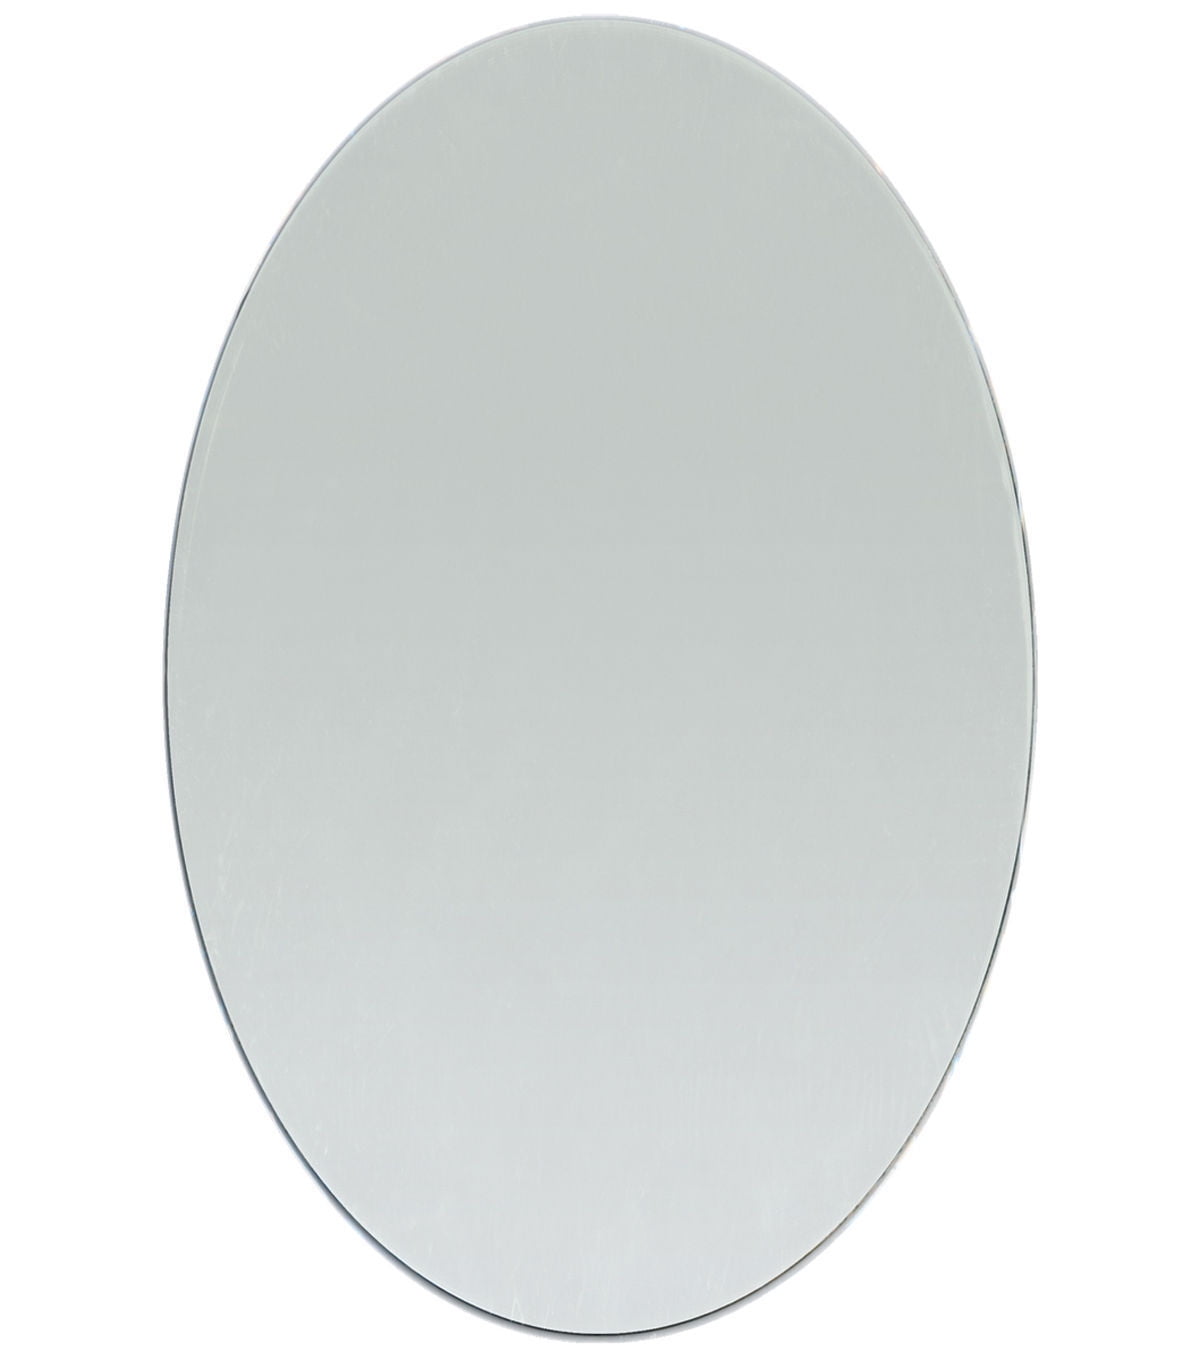 4 X 6 Inch Oval Glass Craft Mirrors Bulk 12 Pieces Mosaic Tiles